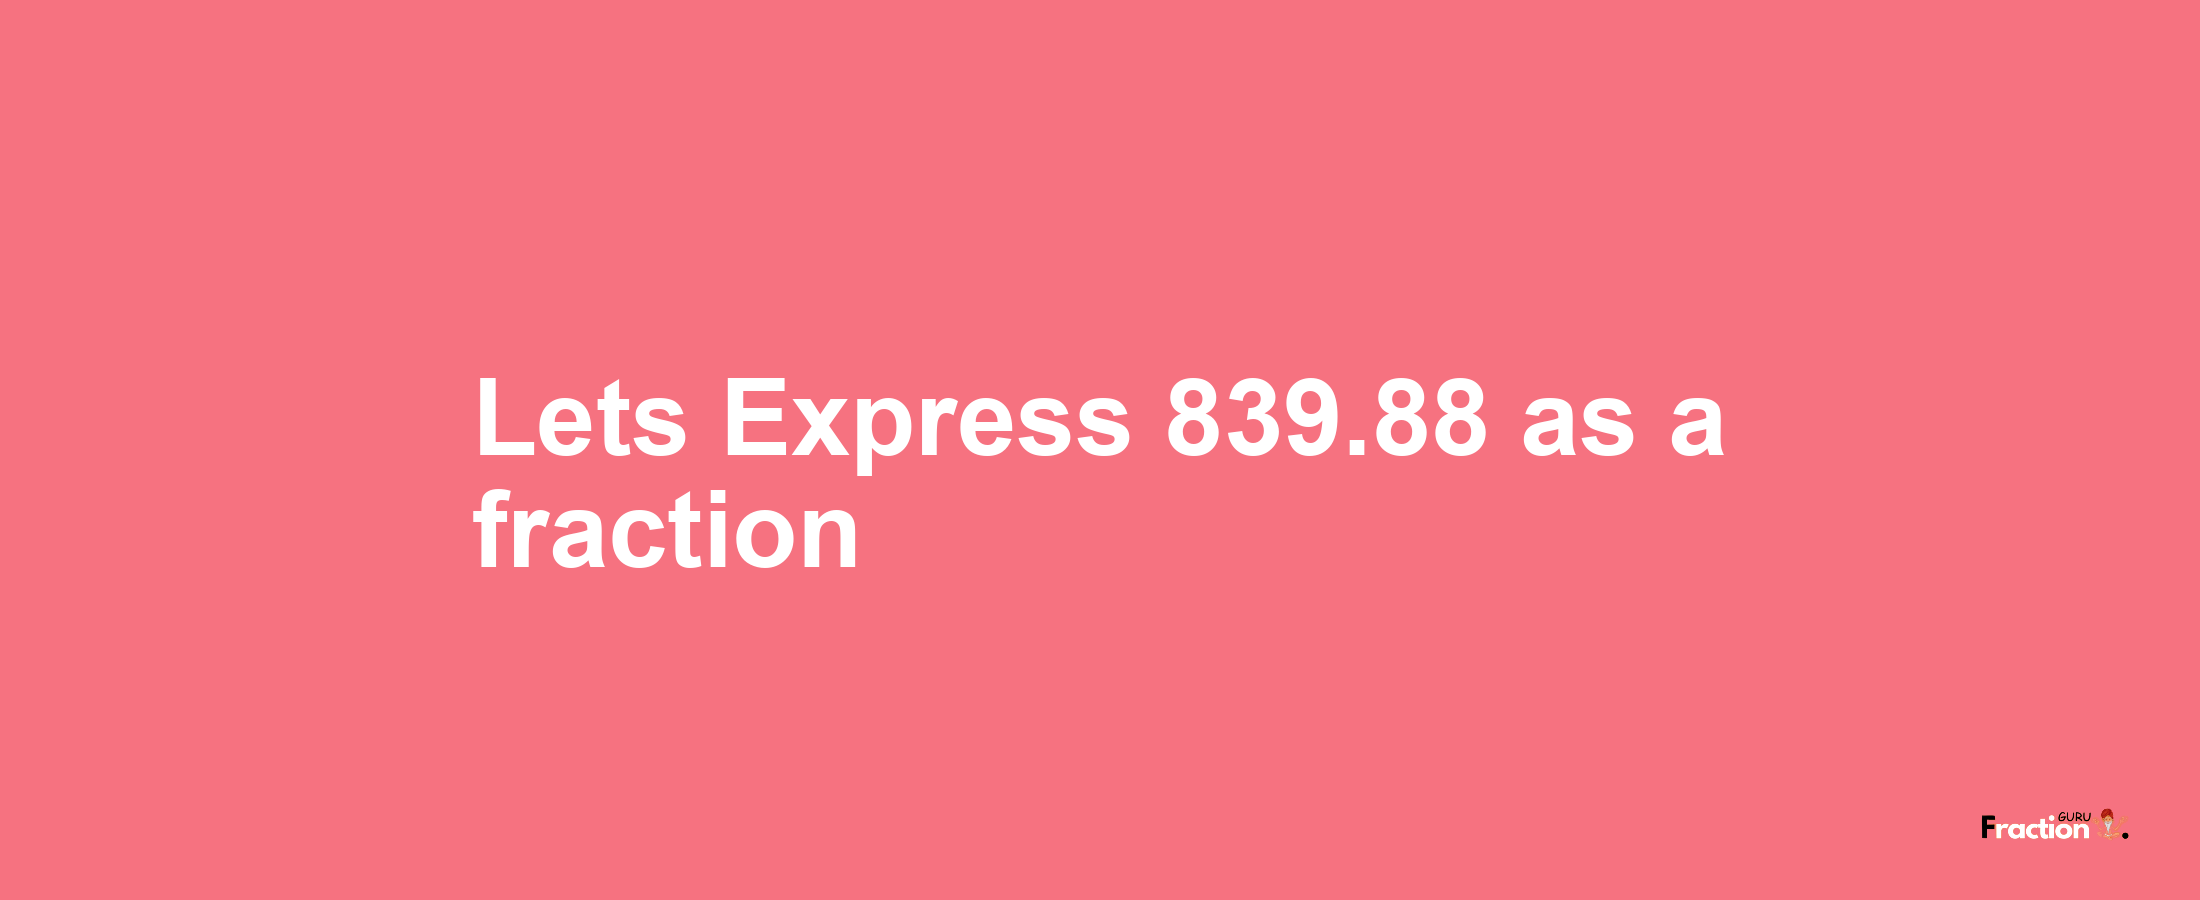 Lets Express 839.88 as afraction